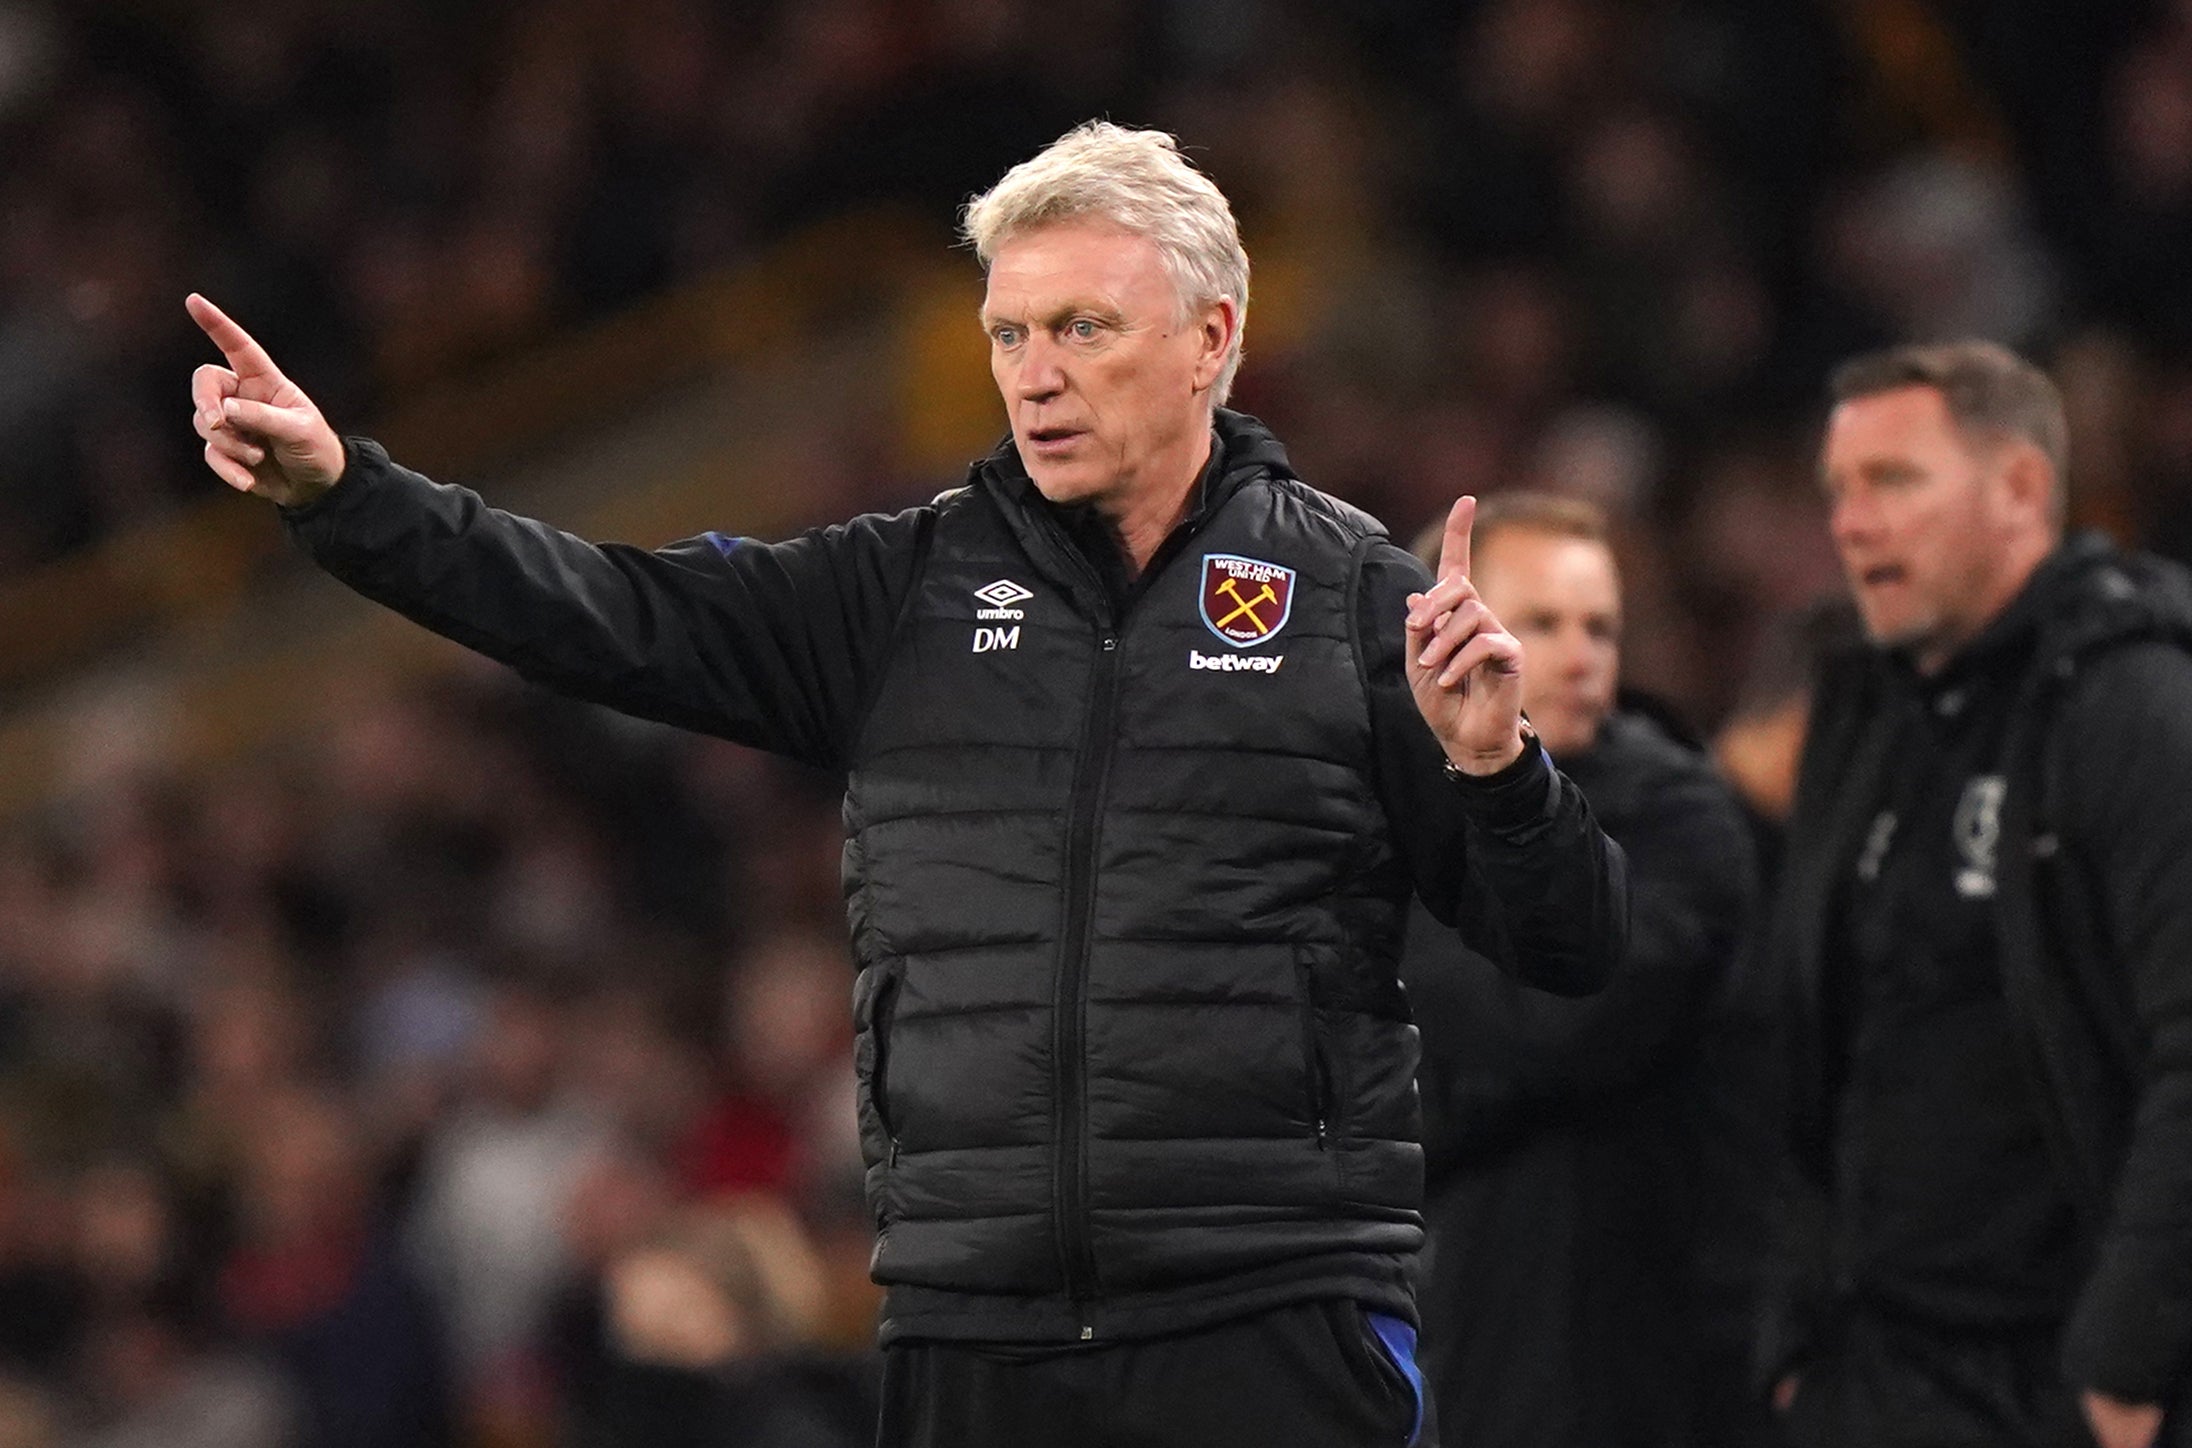 David Moyes has guided West Ham to the knockout stages (Tim Goode/PA)